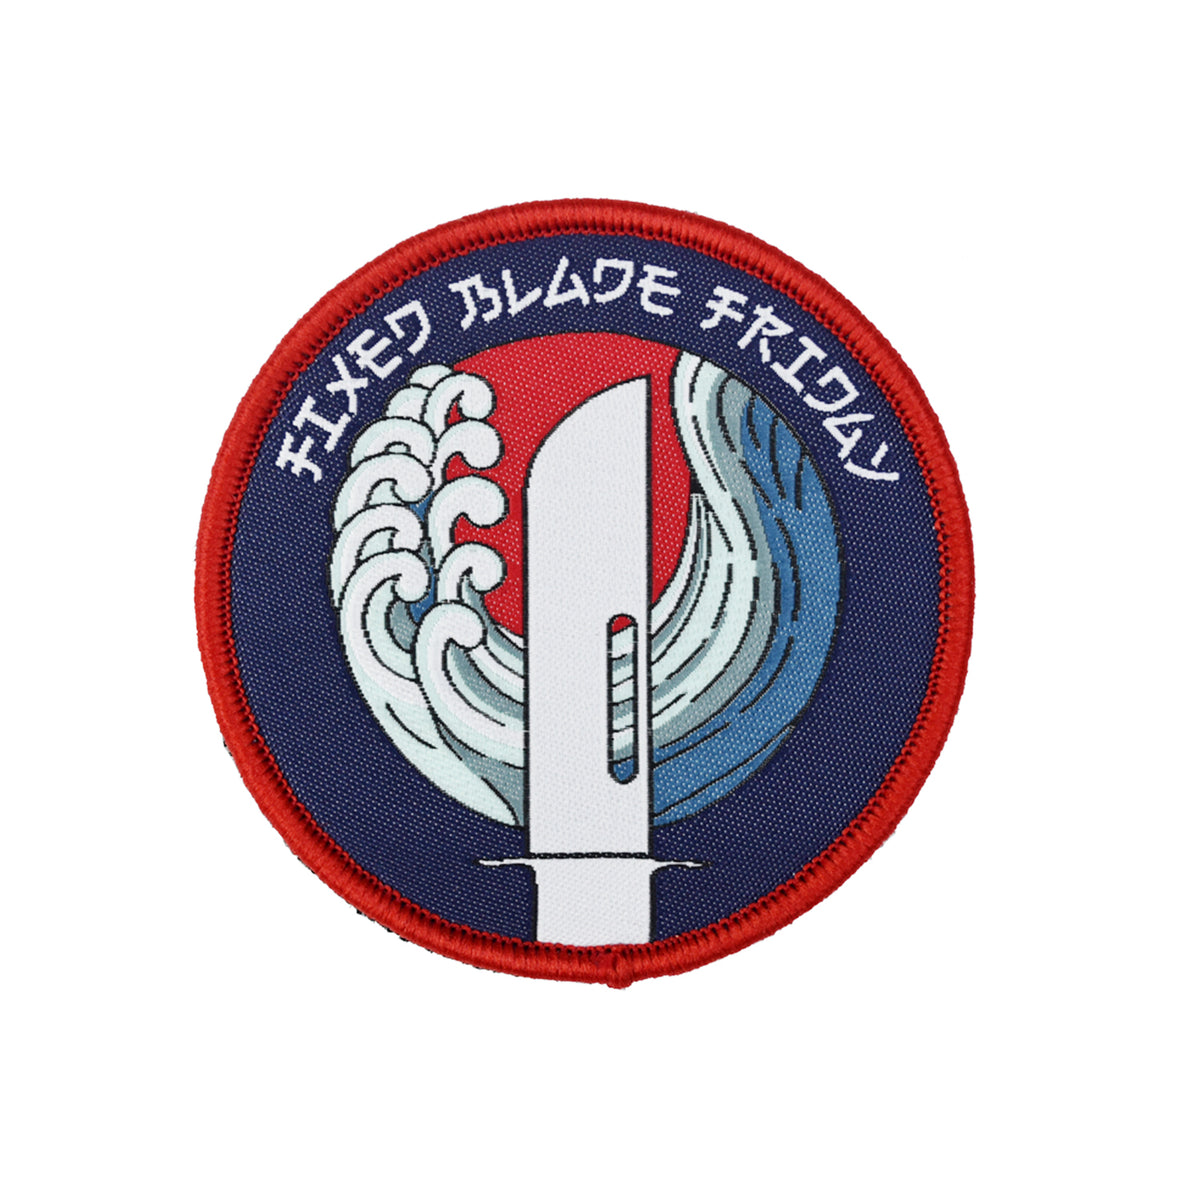 TT Friday EDC Patch (Limited Production)